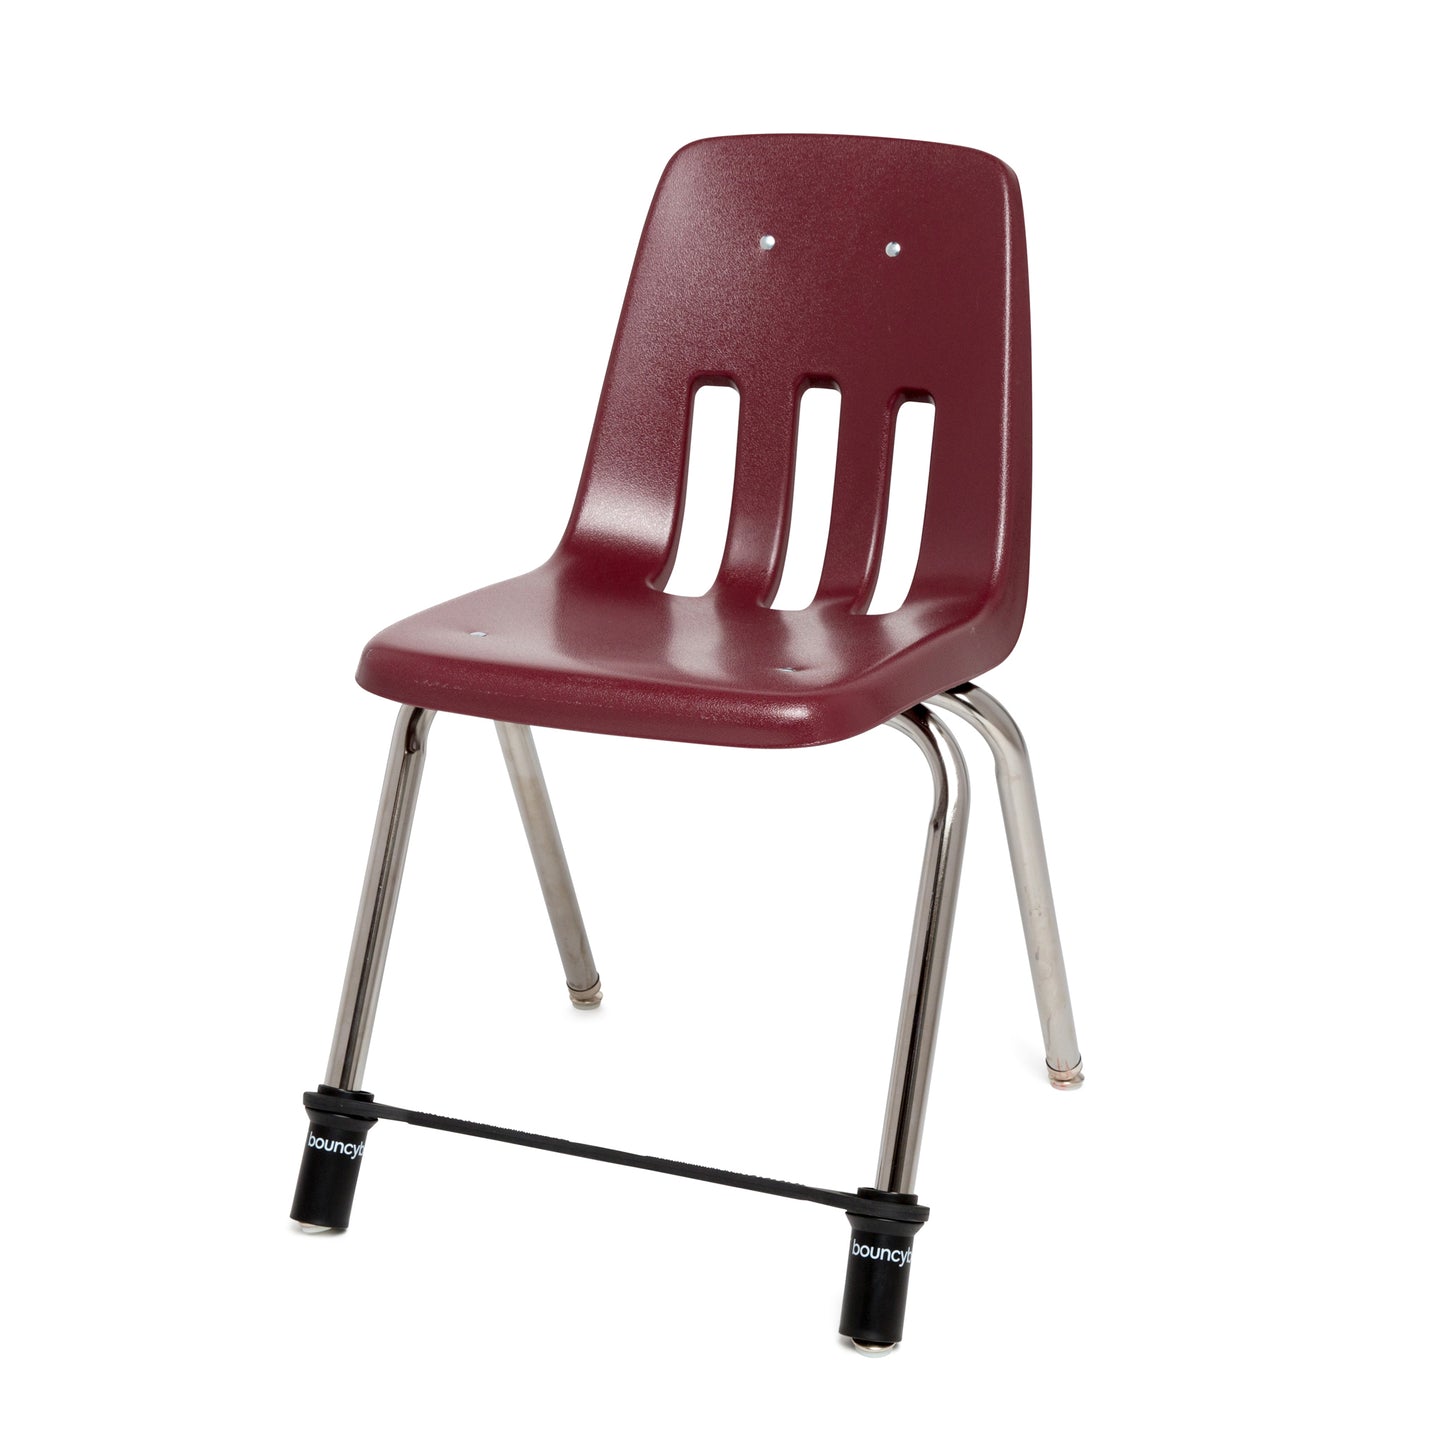 Bouncy Band For Middle/High School Chairs